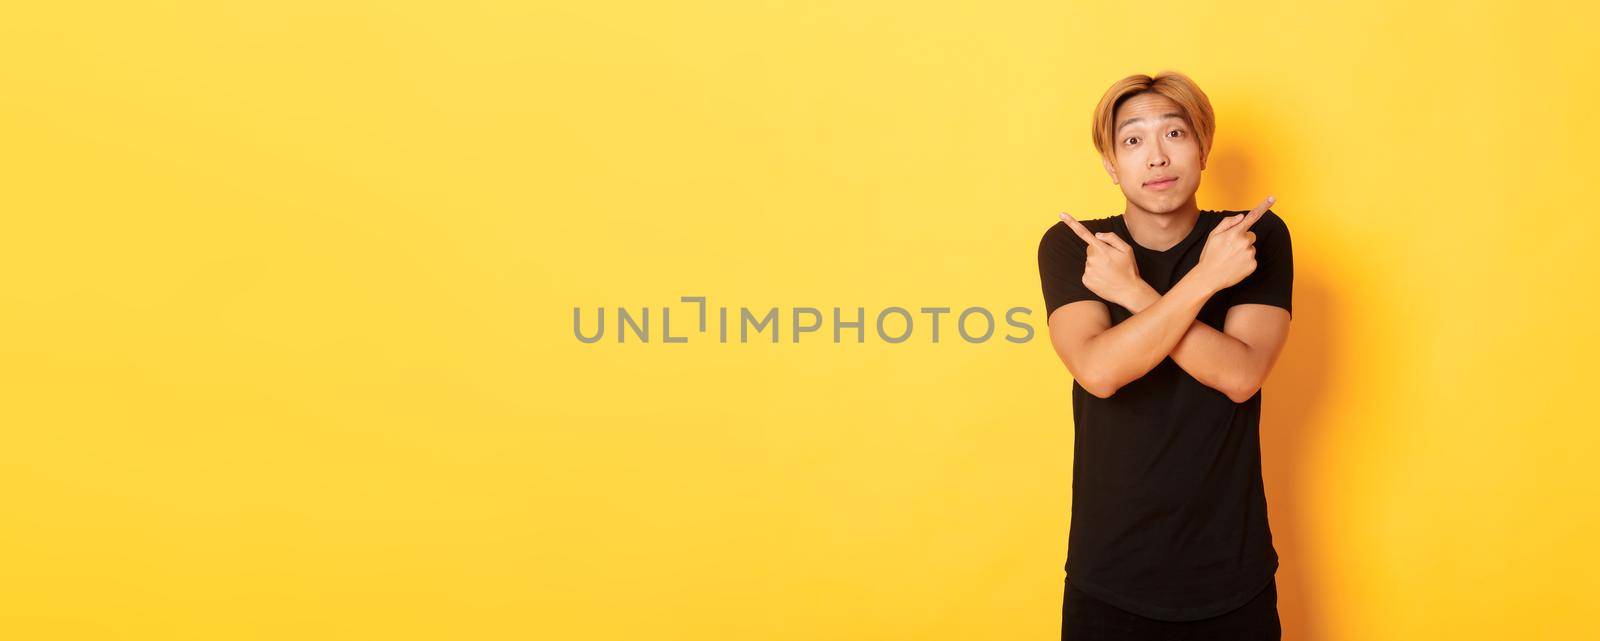 Indecisive handsome guy shrugging puzzled and pointing fingers sideways, standing yellow background.